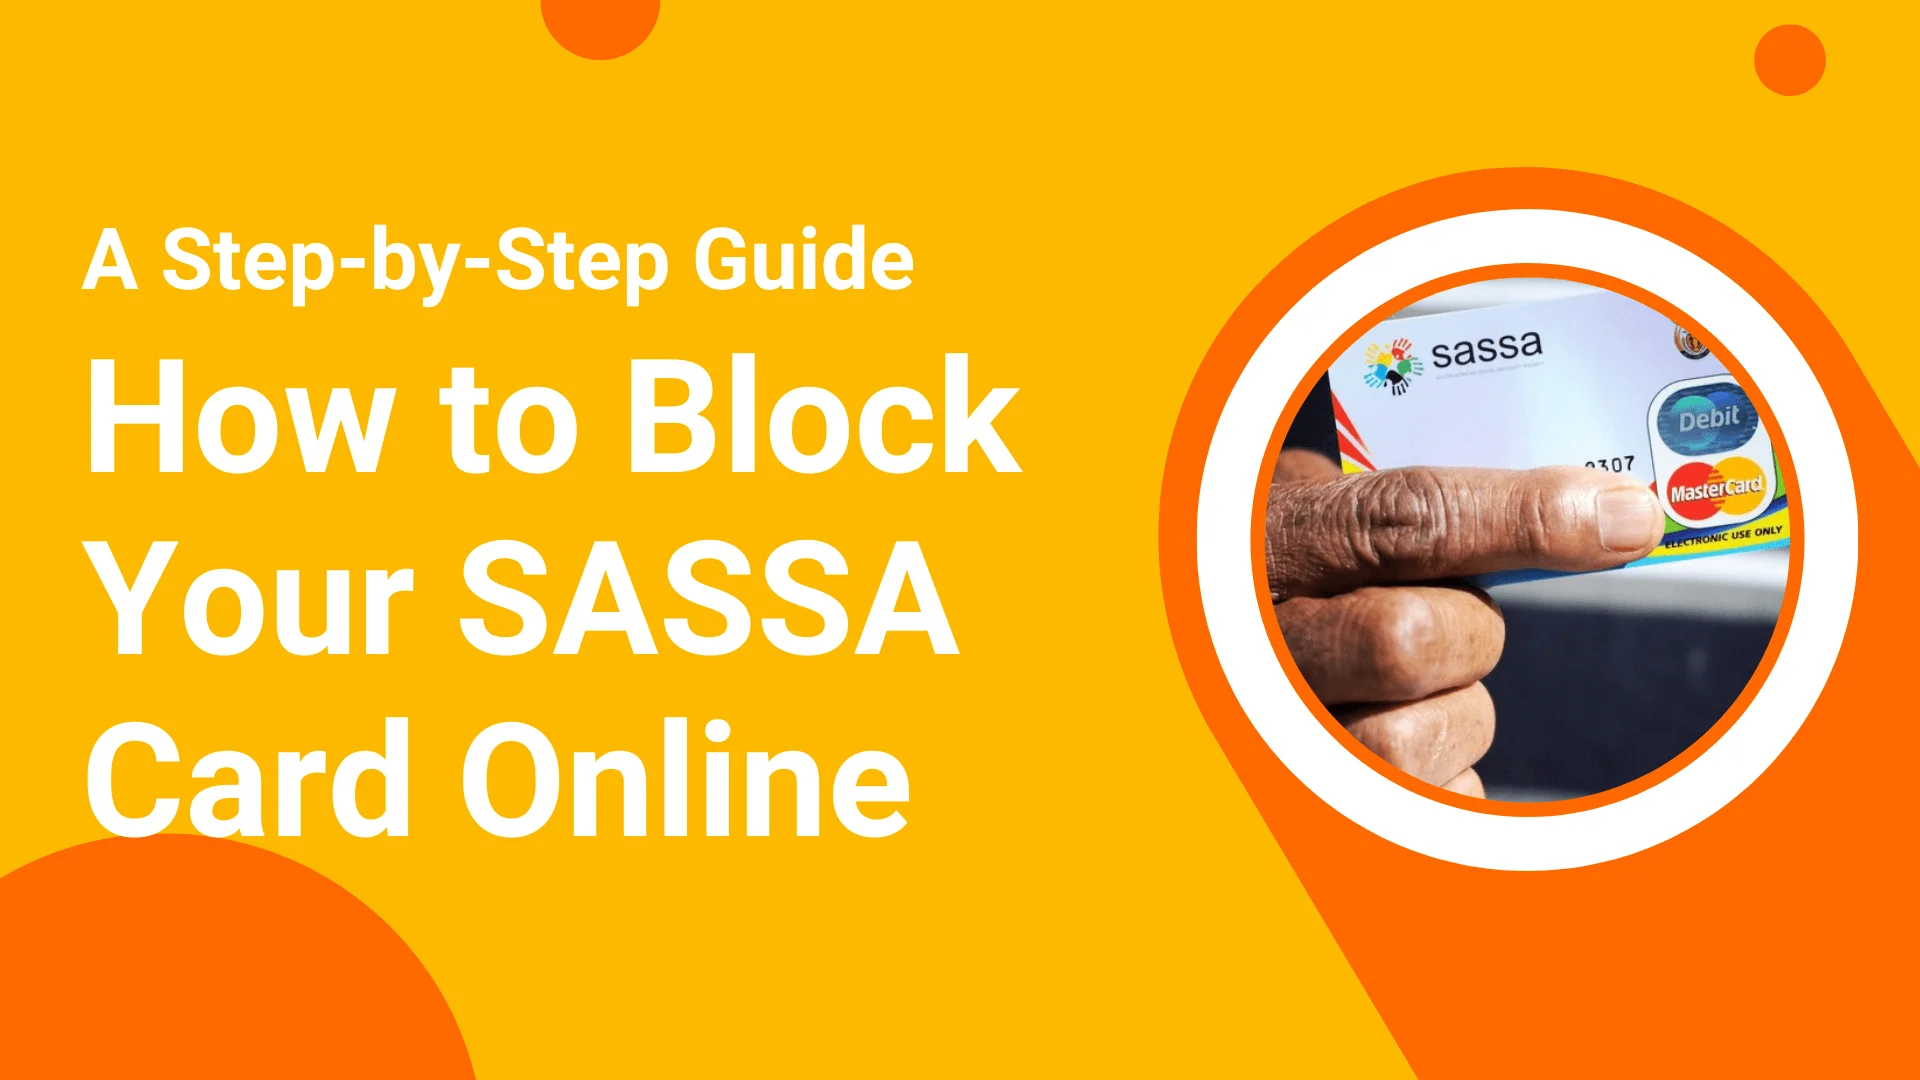 How to Block Your SASSA Card Online